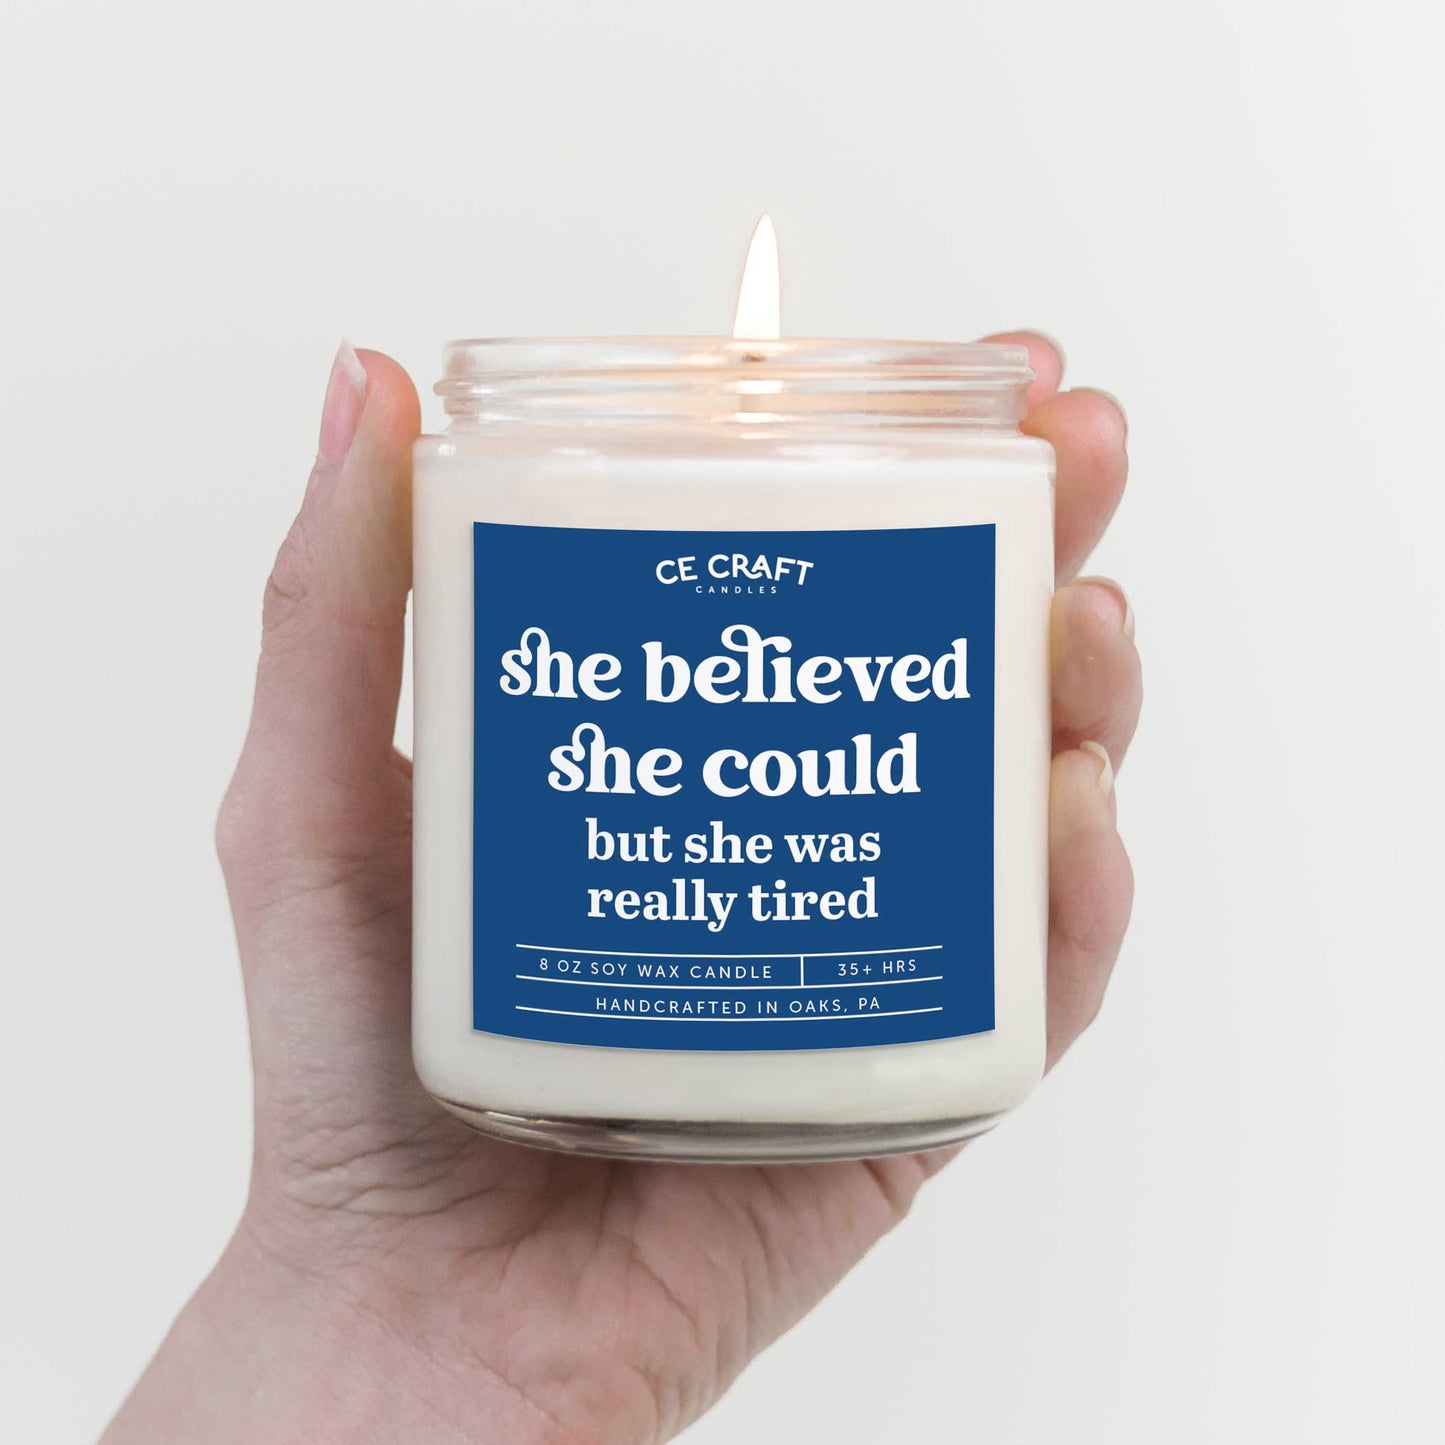 She Believed She Could But She Was Really Tired Soy Wax Candle Candles CE Craft 